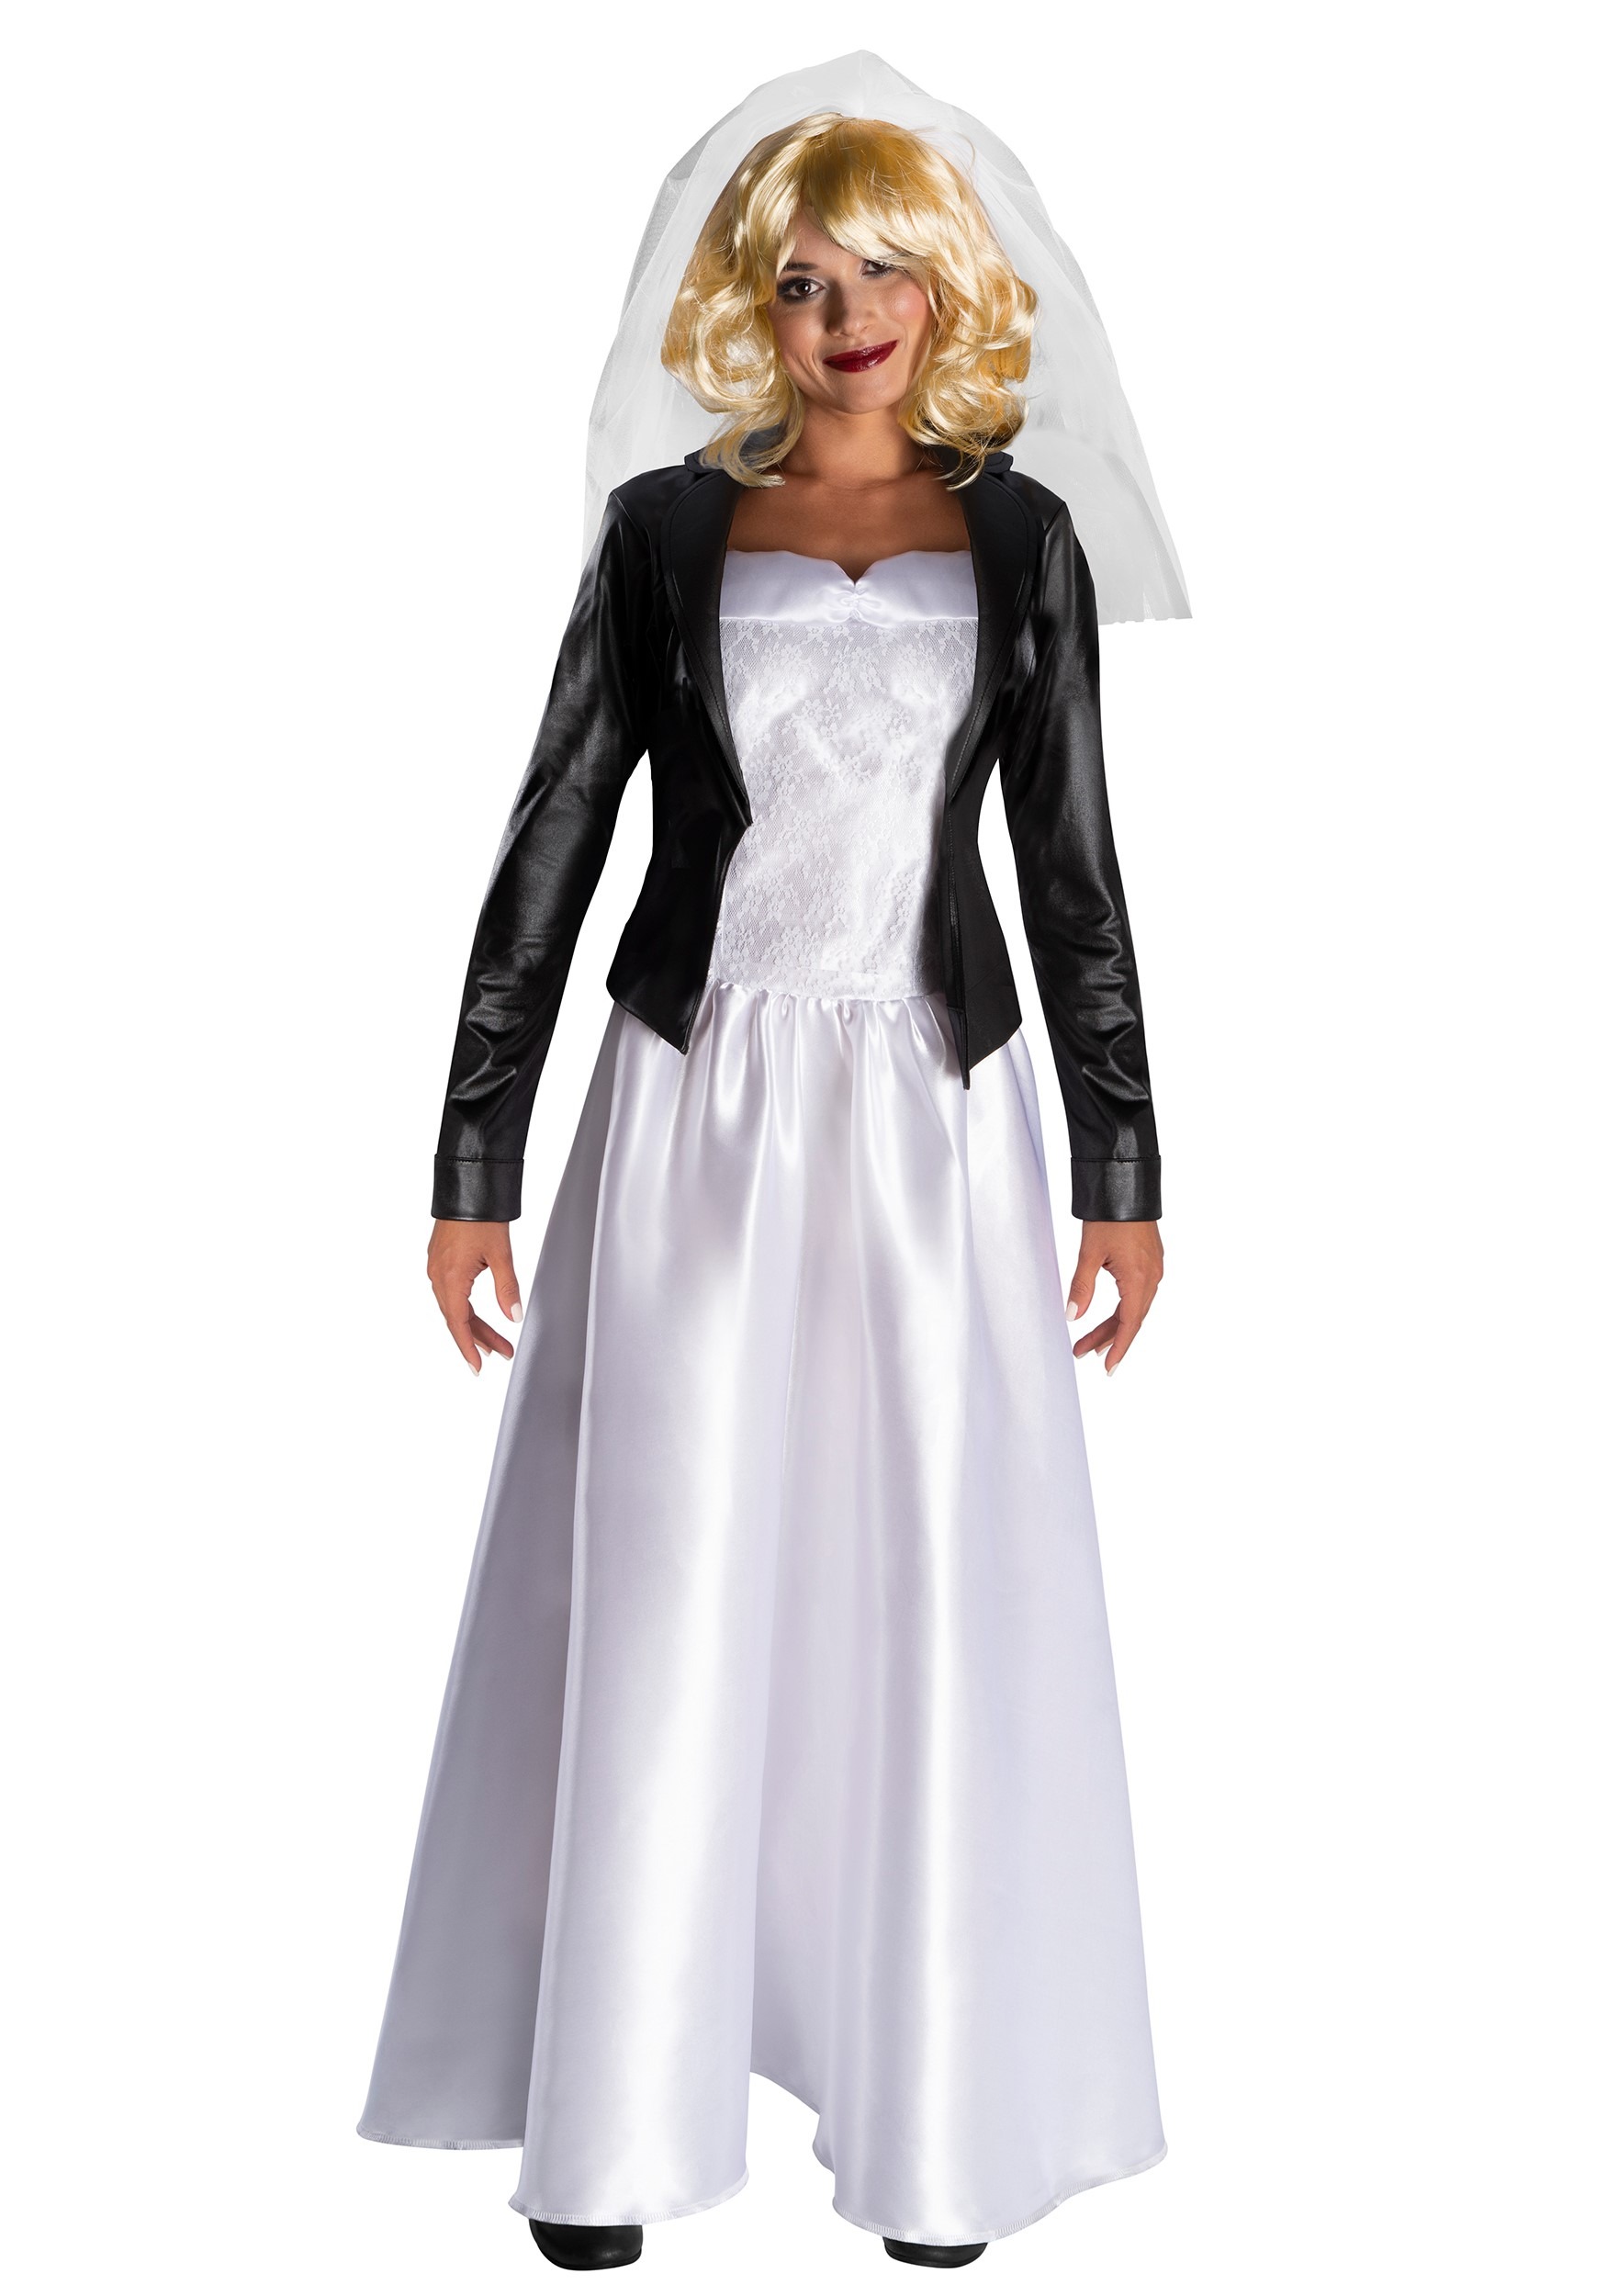 Bride of Chucky Adult Costume